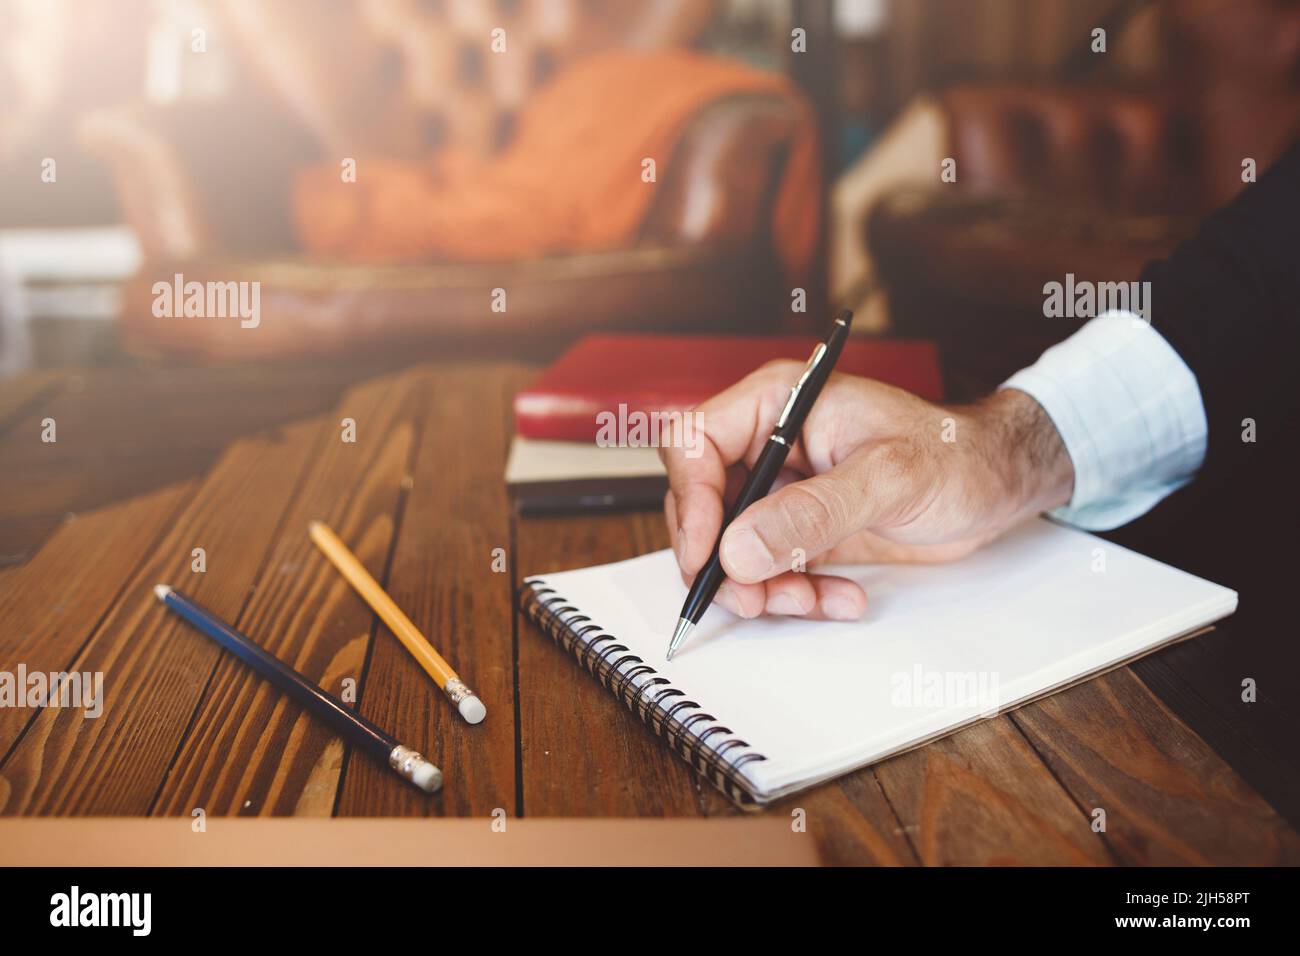 Personal and business correspondence concept Stock Photo